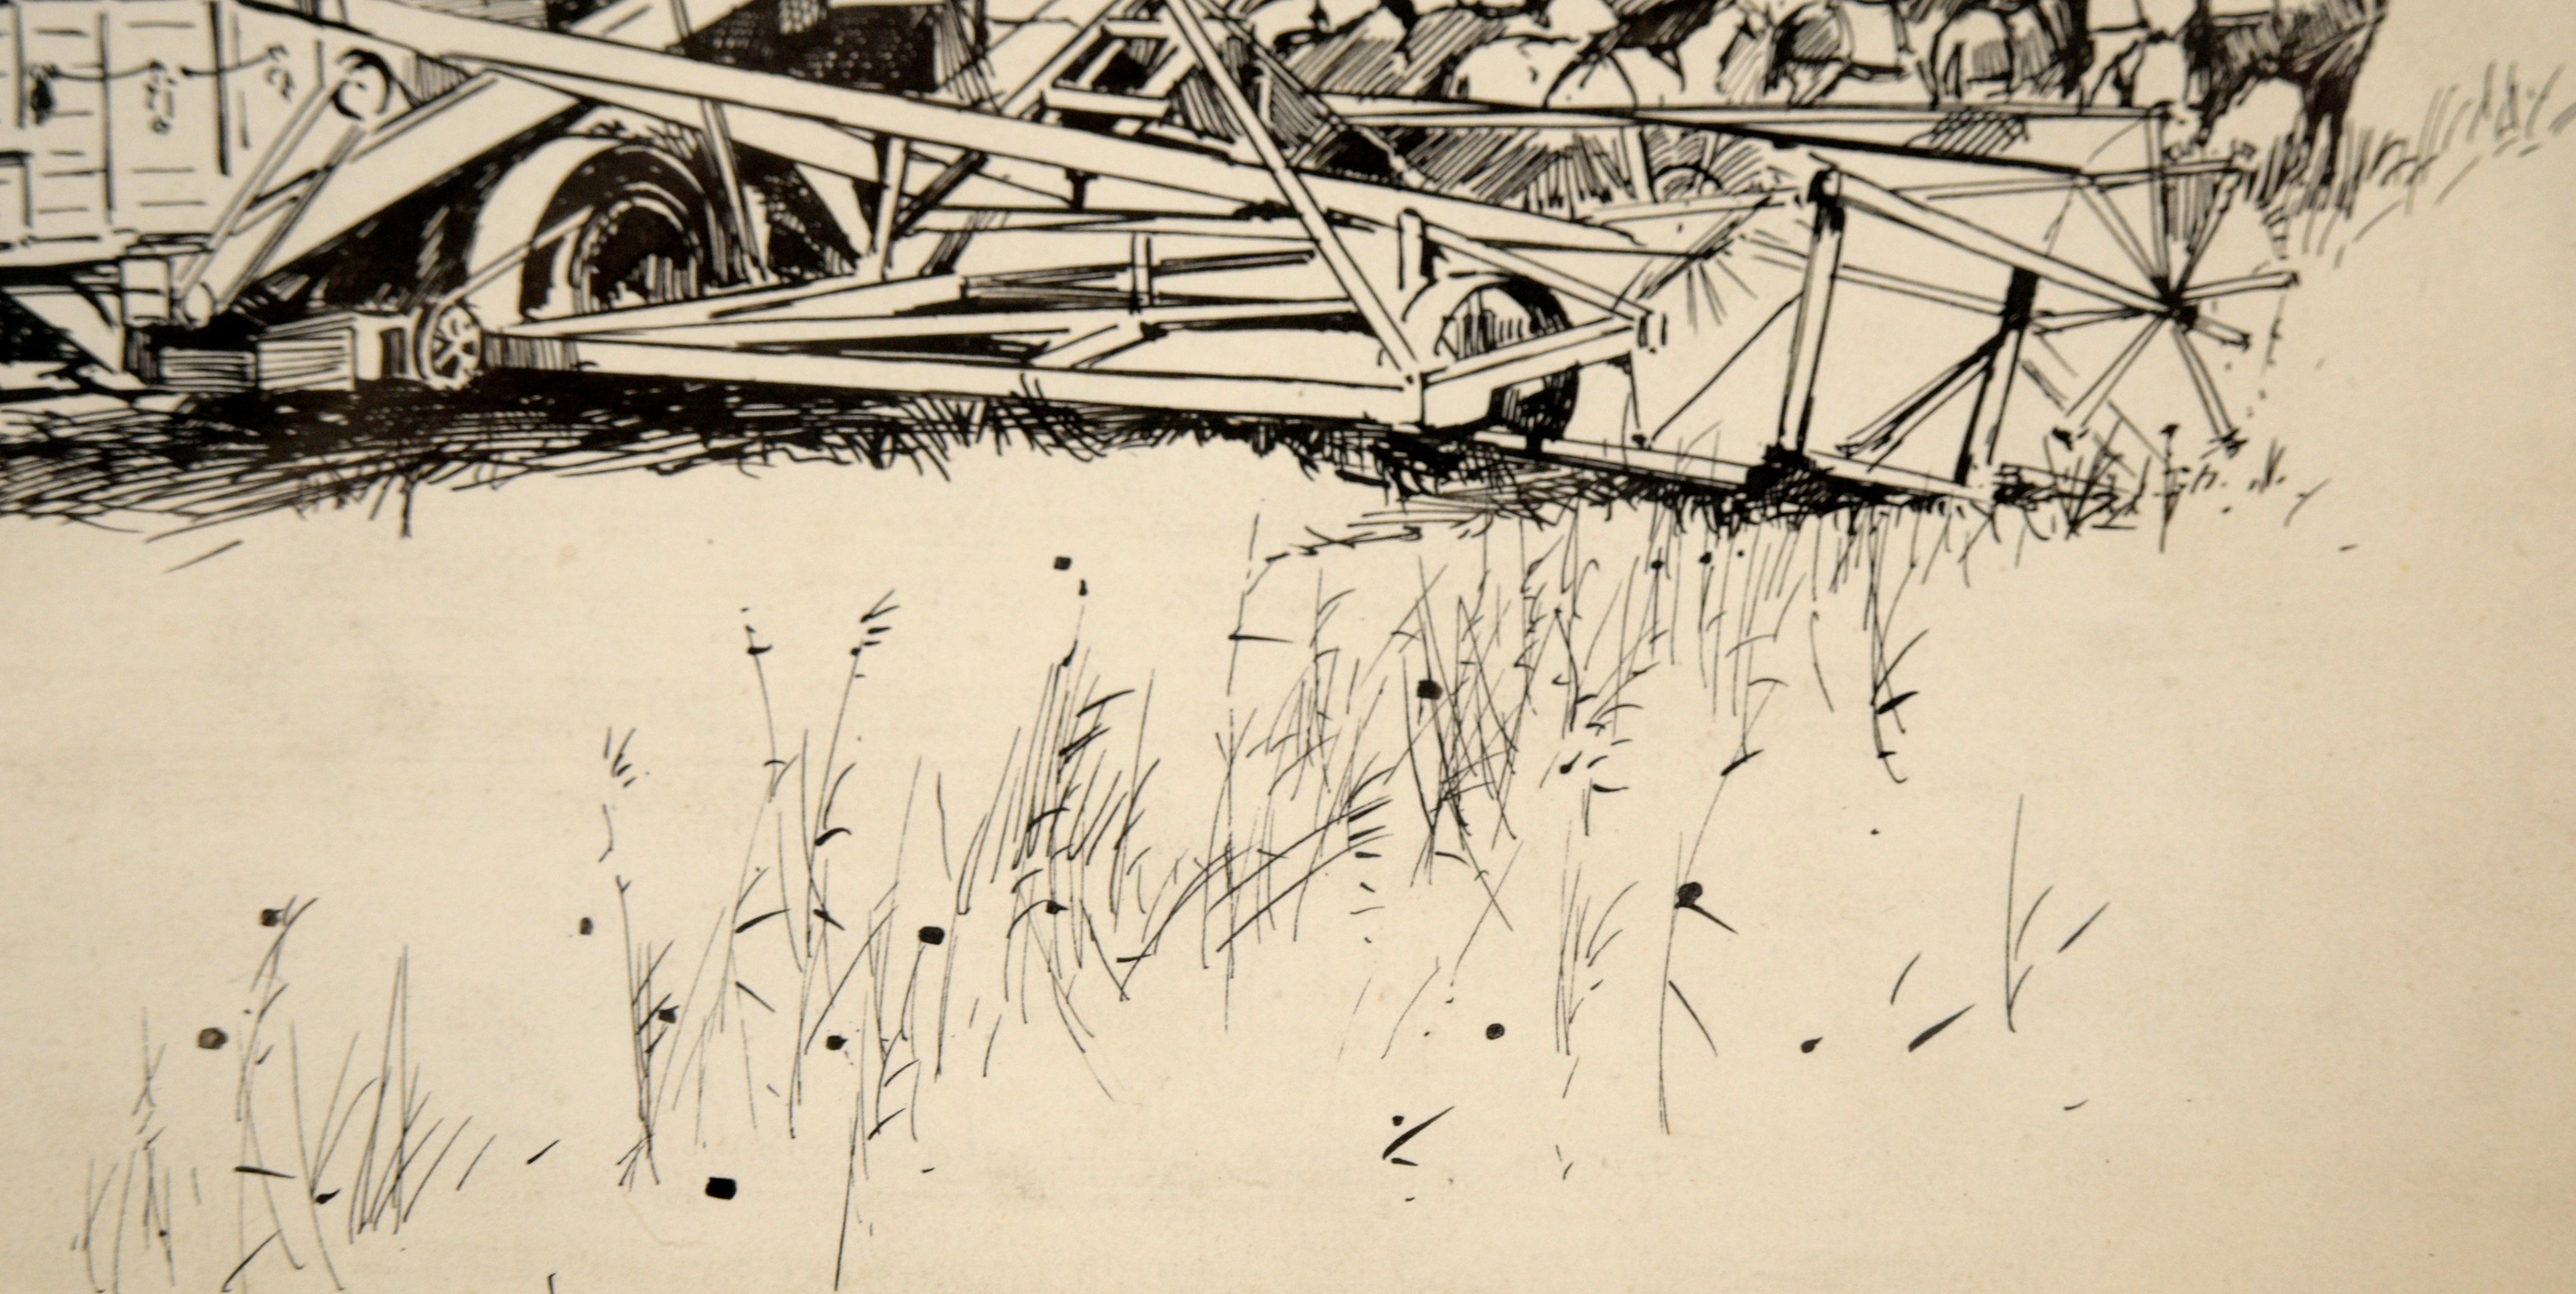 Delicate and detailed drawing of a harvester in the field by an unknown artist. A team of horses is pulling a large harvester, controlled by four people riding on the machine. To the left, two more horses can be seen entering the field, and a farm